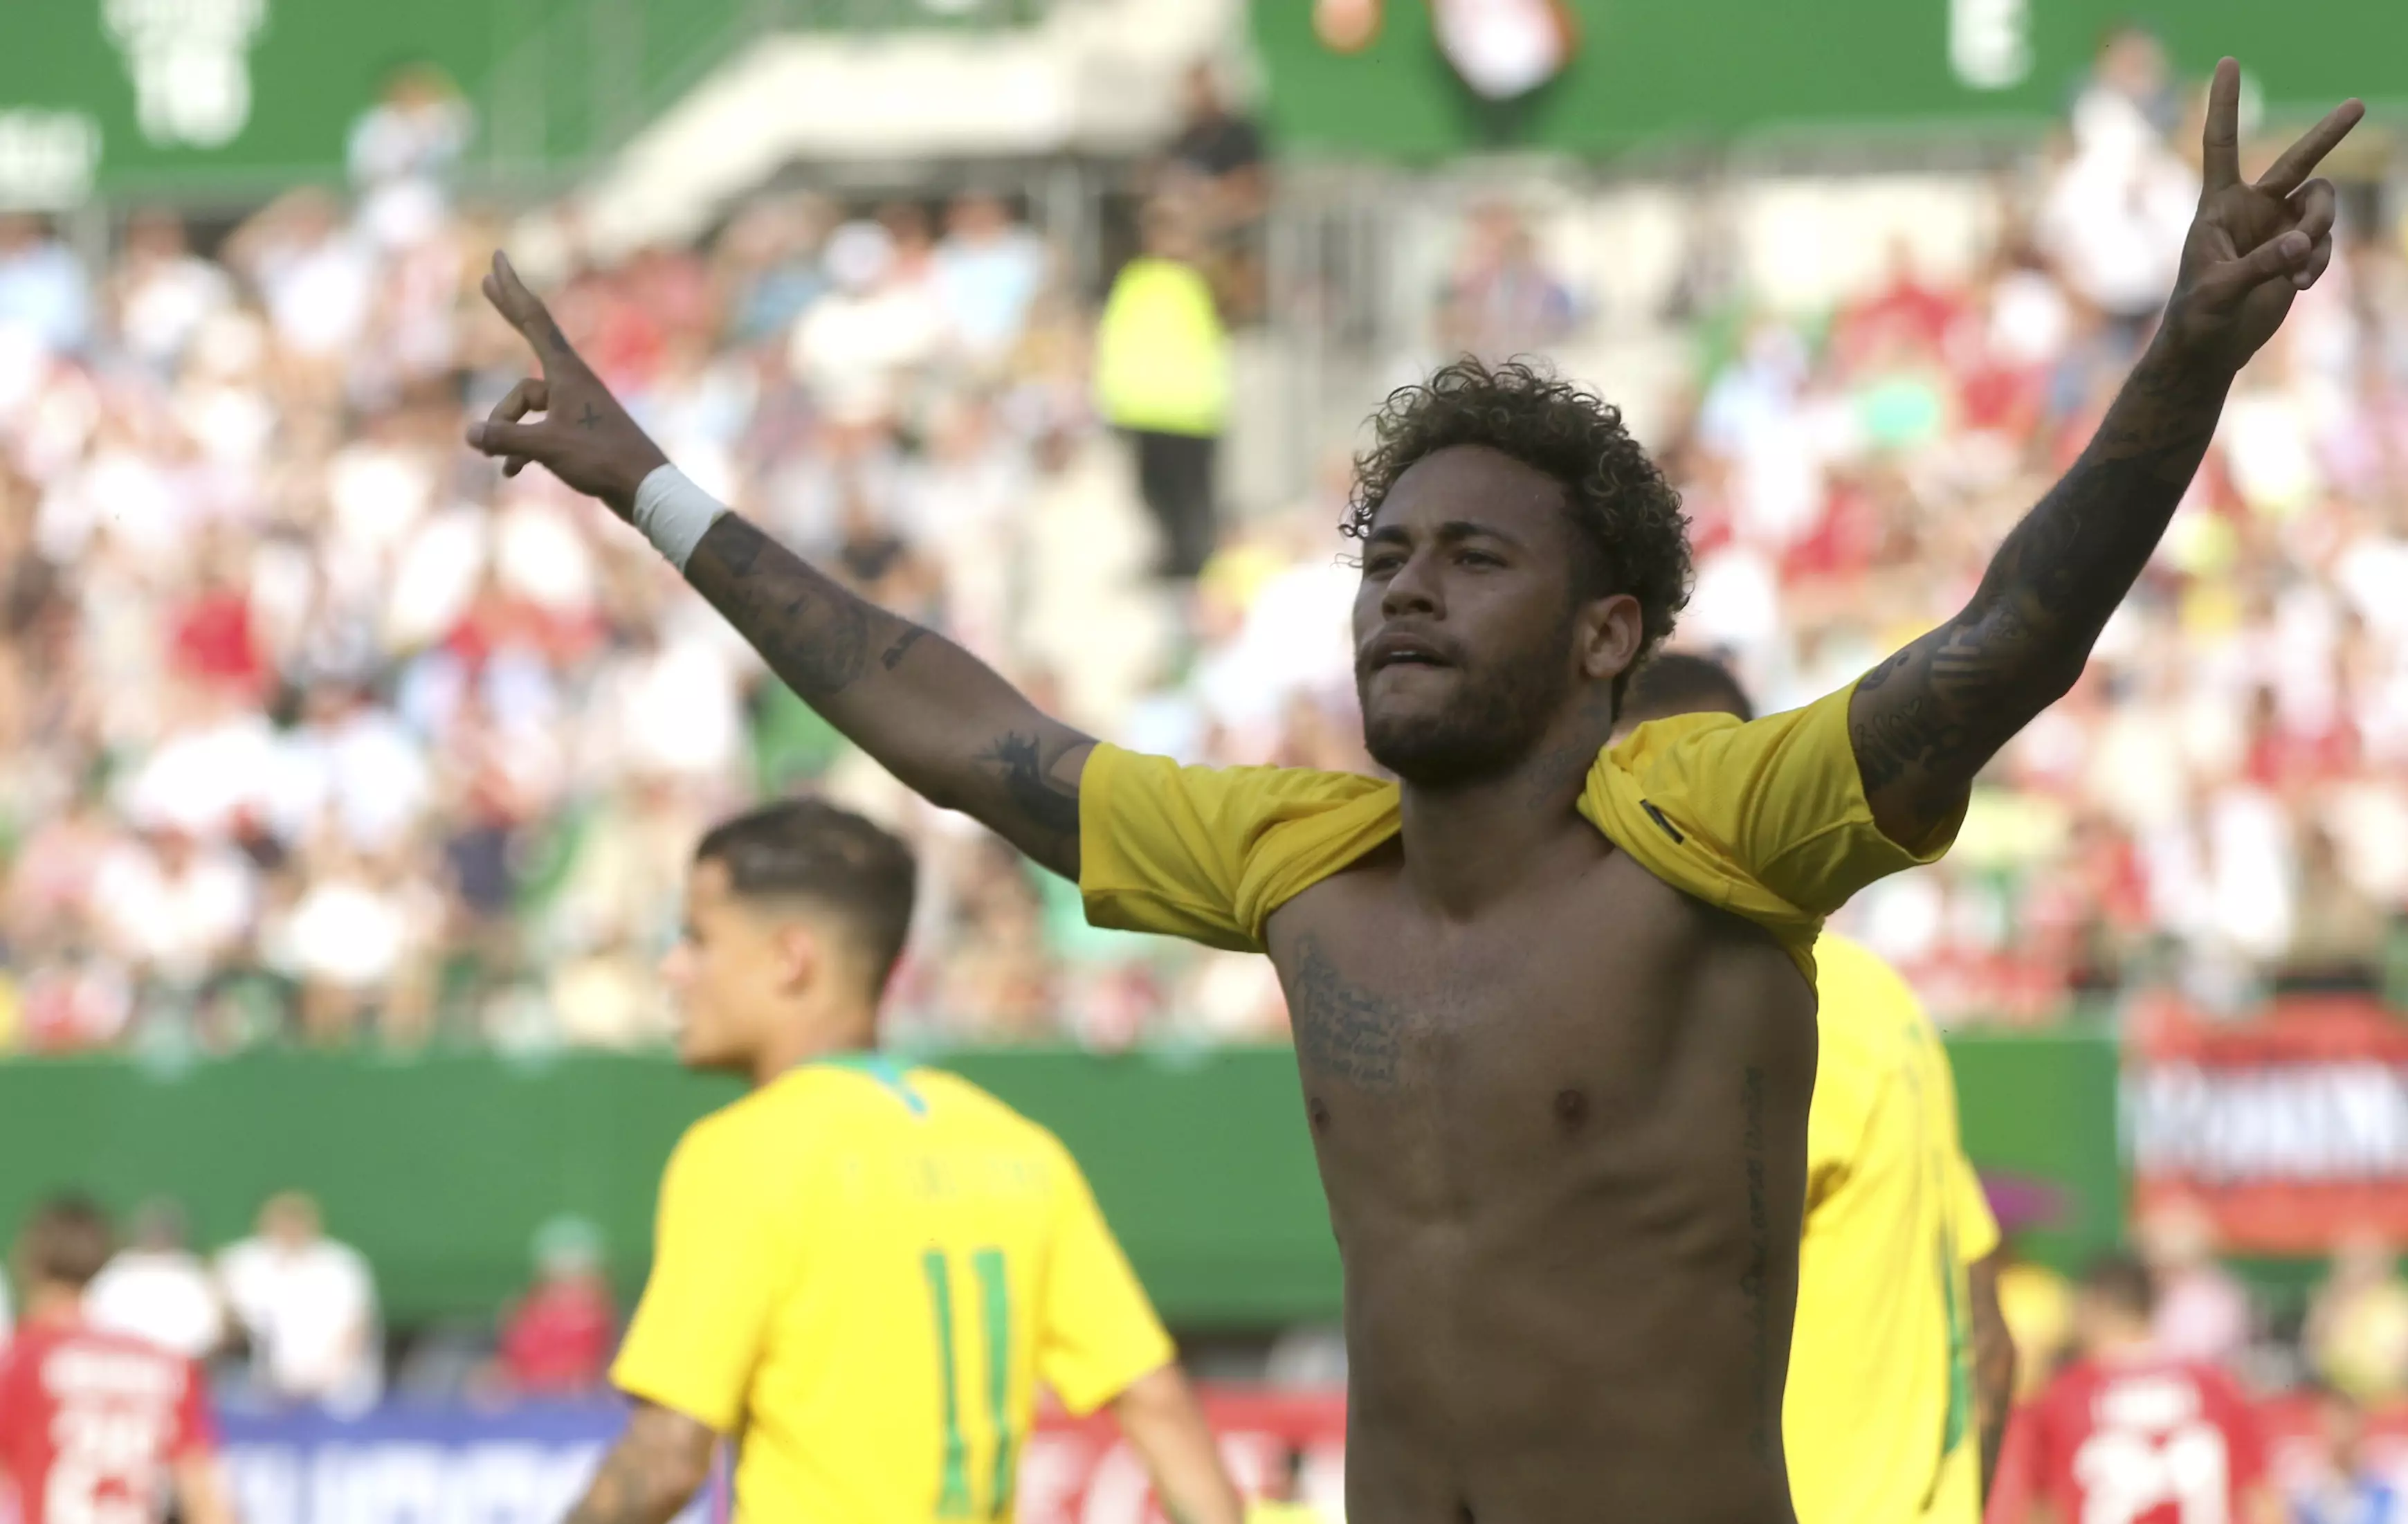 Neymar has scored 55 goals for his country. Image: PA Images